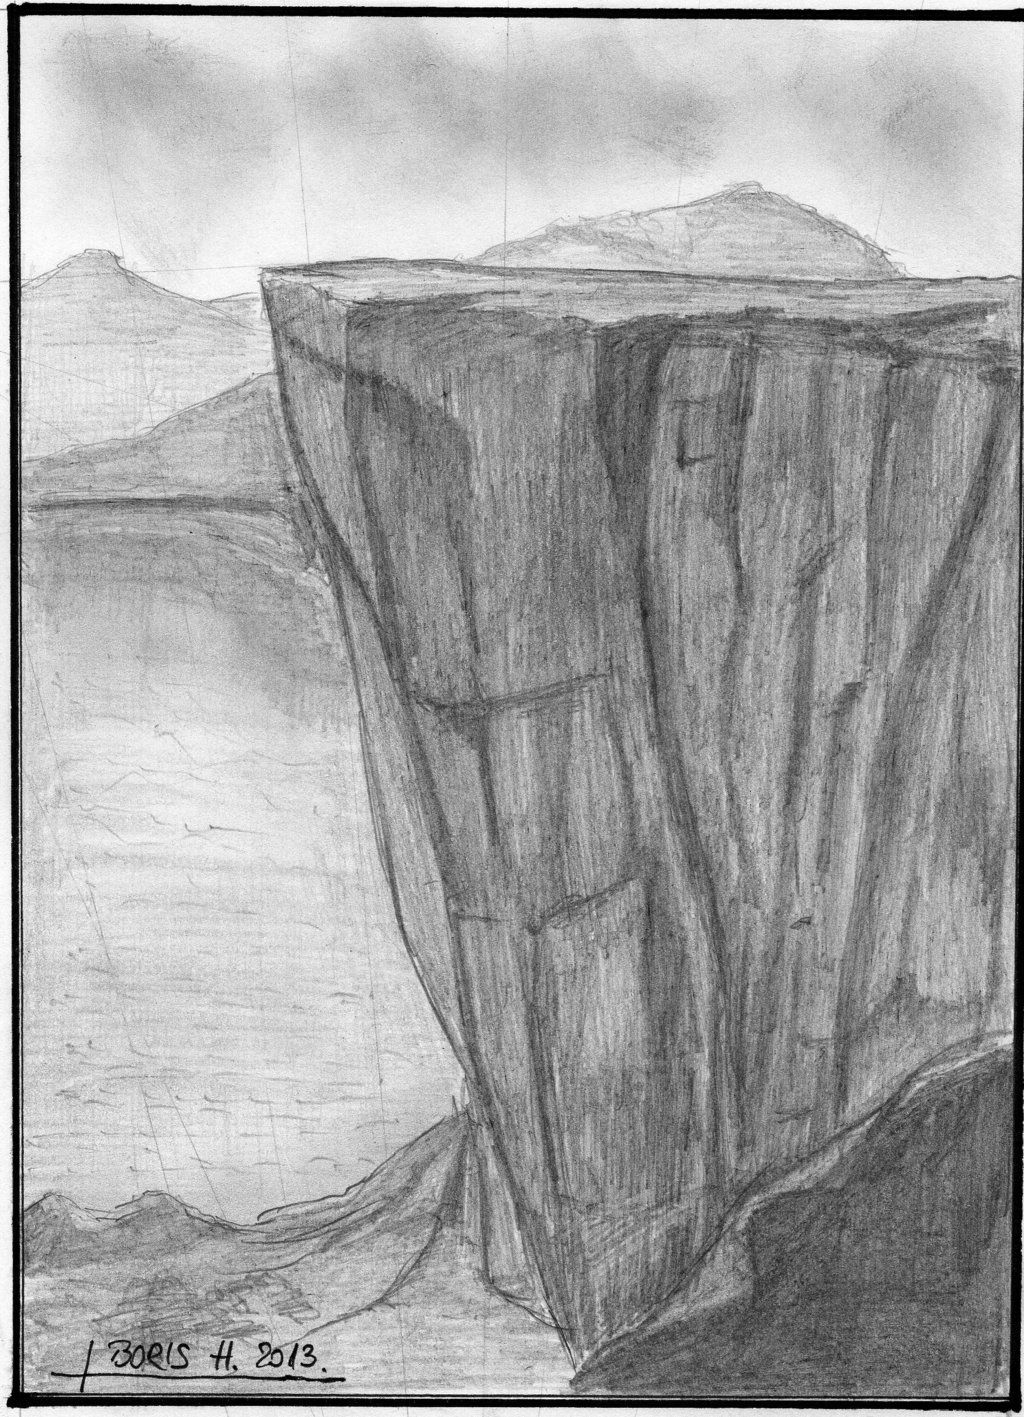 Cliff Drawing Sketch